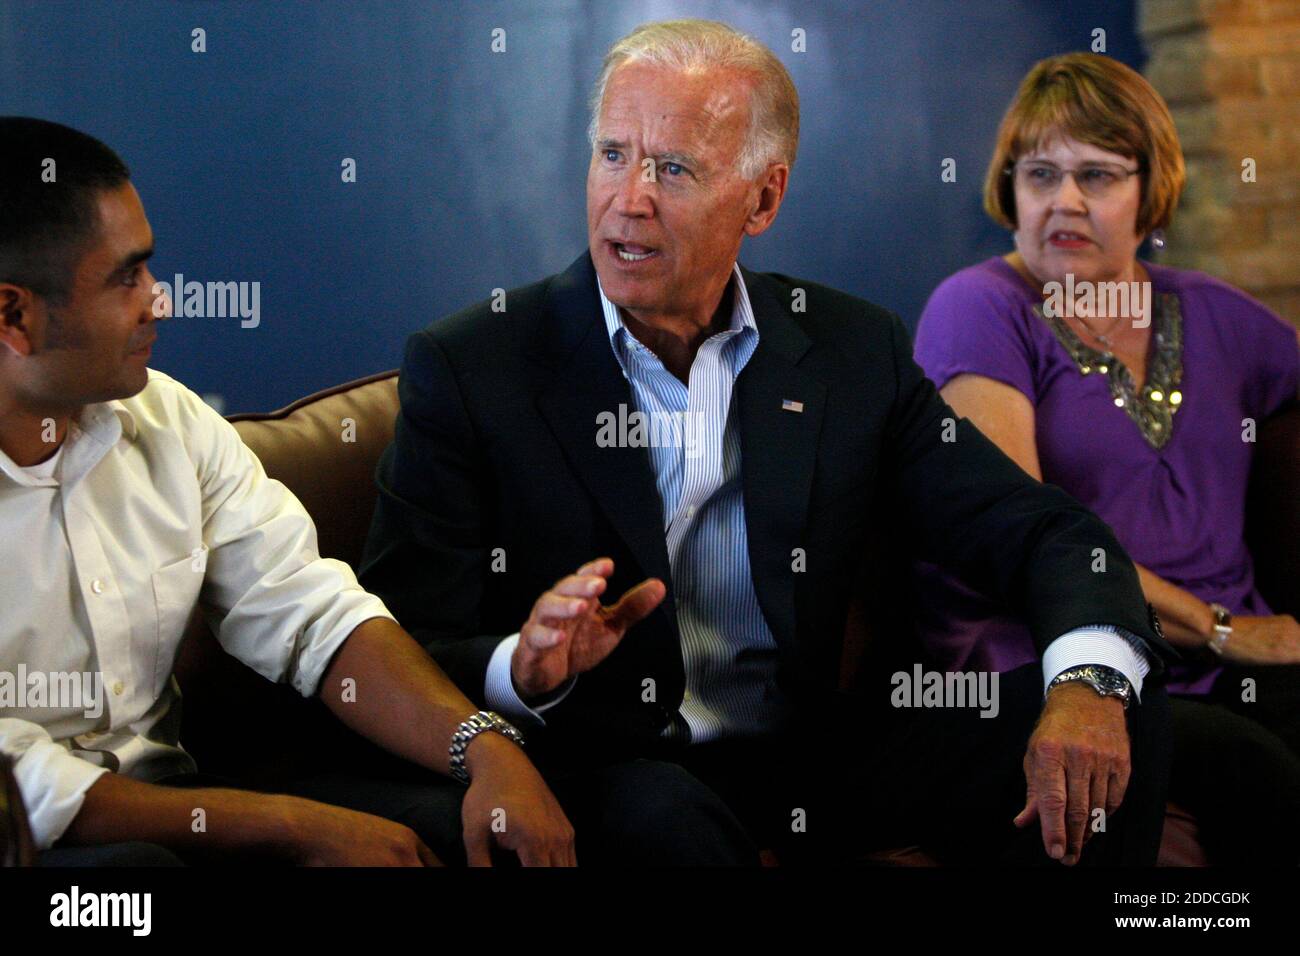 NO FILM, NO VIDEO, NO TV, NO DOCUMENTARY - Vice President Joe Biden speaks with Luis de la Cruz of Schertz, Tex., left, and Carolyn Gigerich, of Indianapolis, Ind., right, at a coffee shop Monday, August 13, 2012, following a rally in Durham, North Carolina, USA. Differences between the Democratic and Republican tickets are stark on issues from taxes to education to spending Biden said. Photo by Travis Long/Raleigh News Observer/MCT/ABACAPRESS.COM Stock Photo